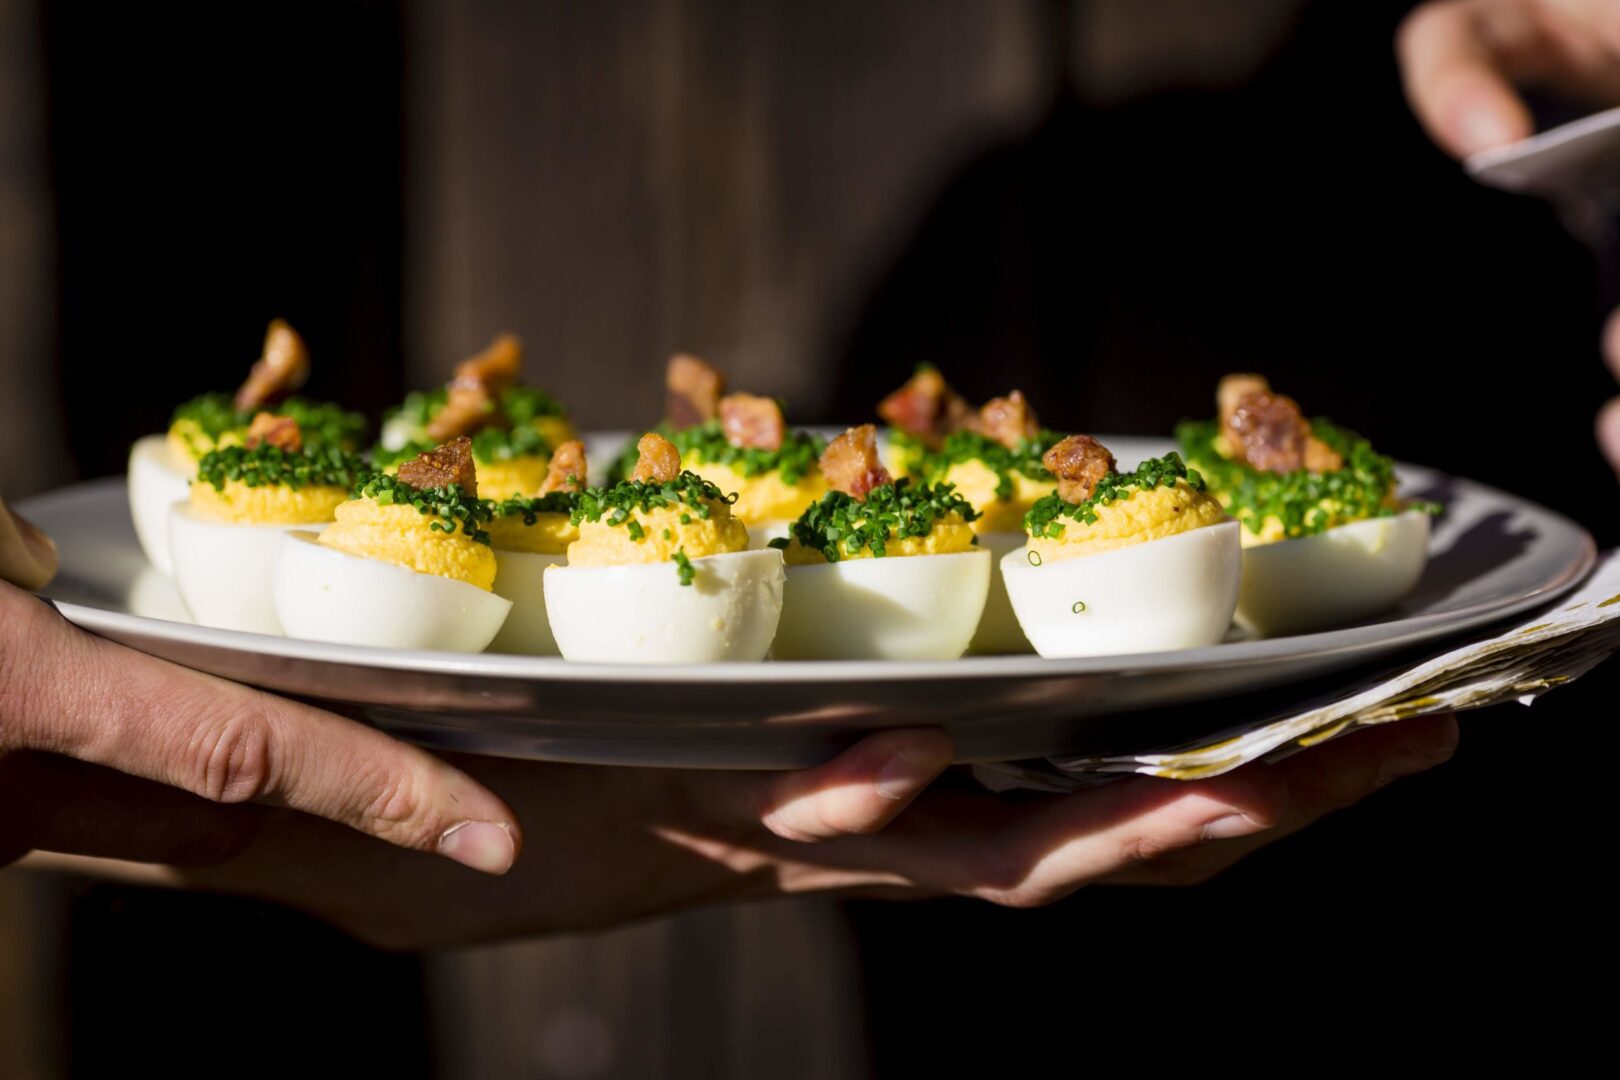 Deviled eggs served on a plate.